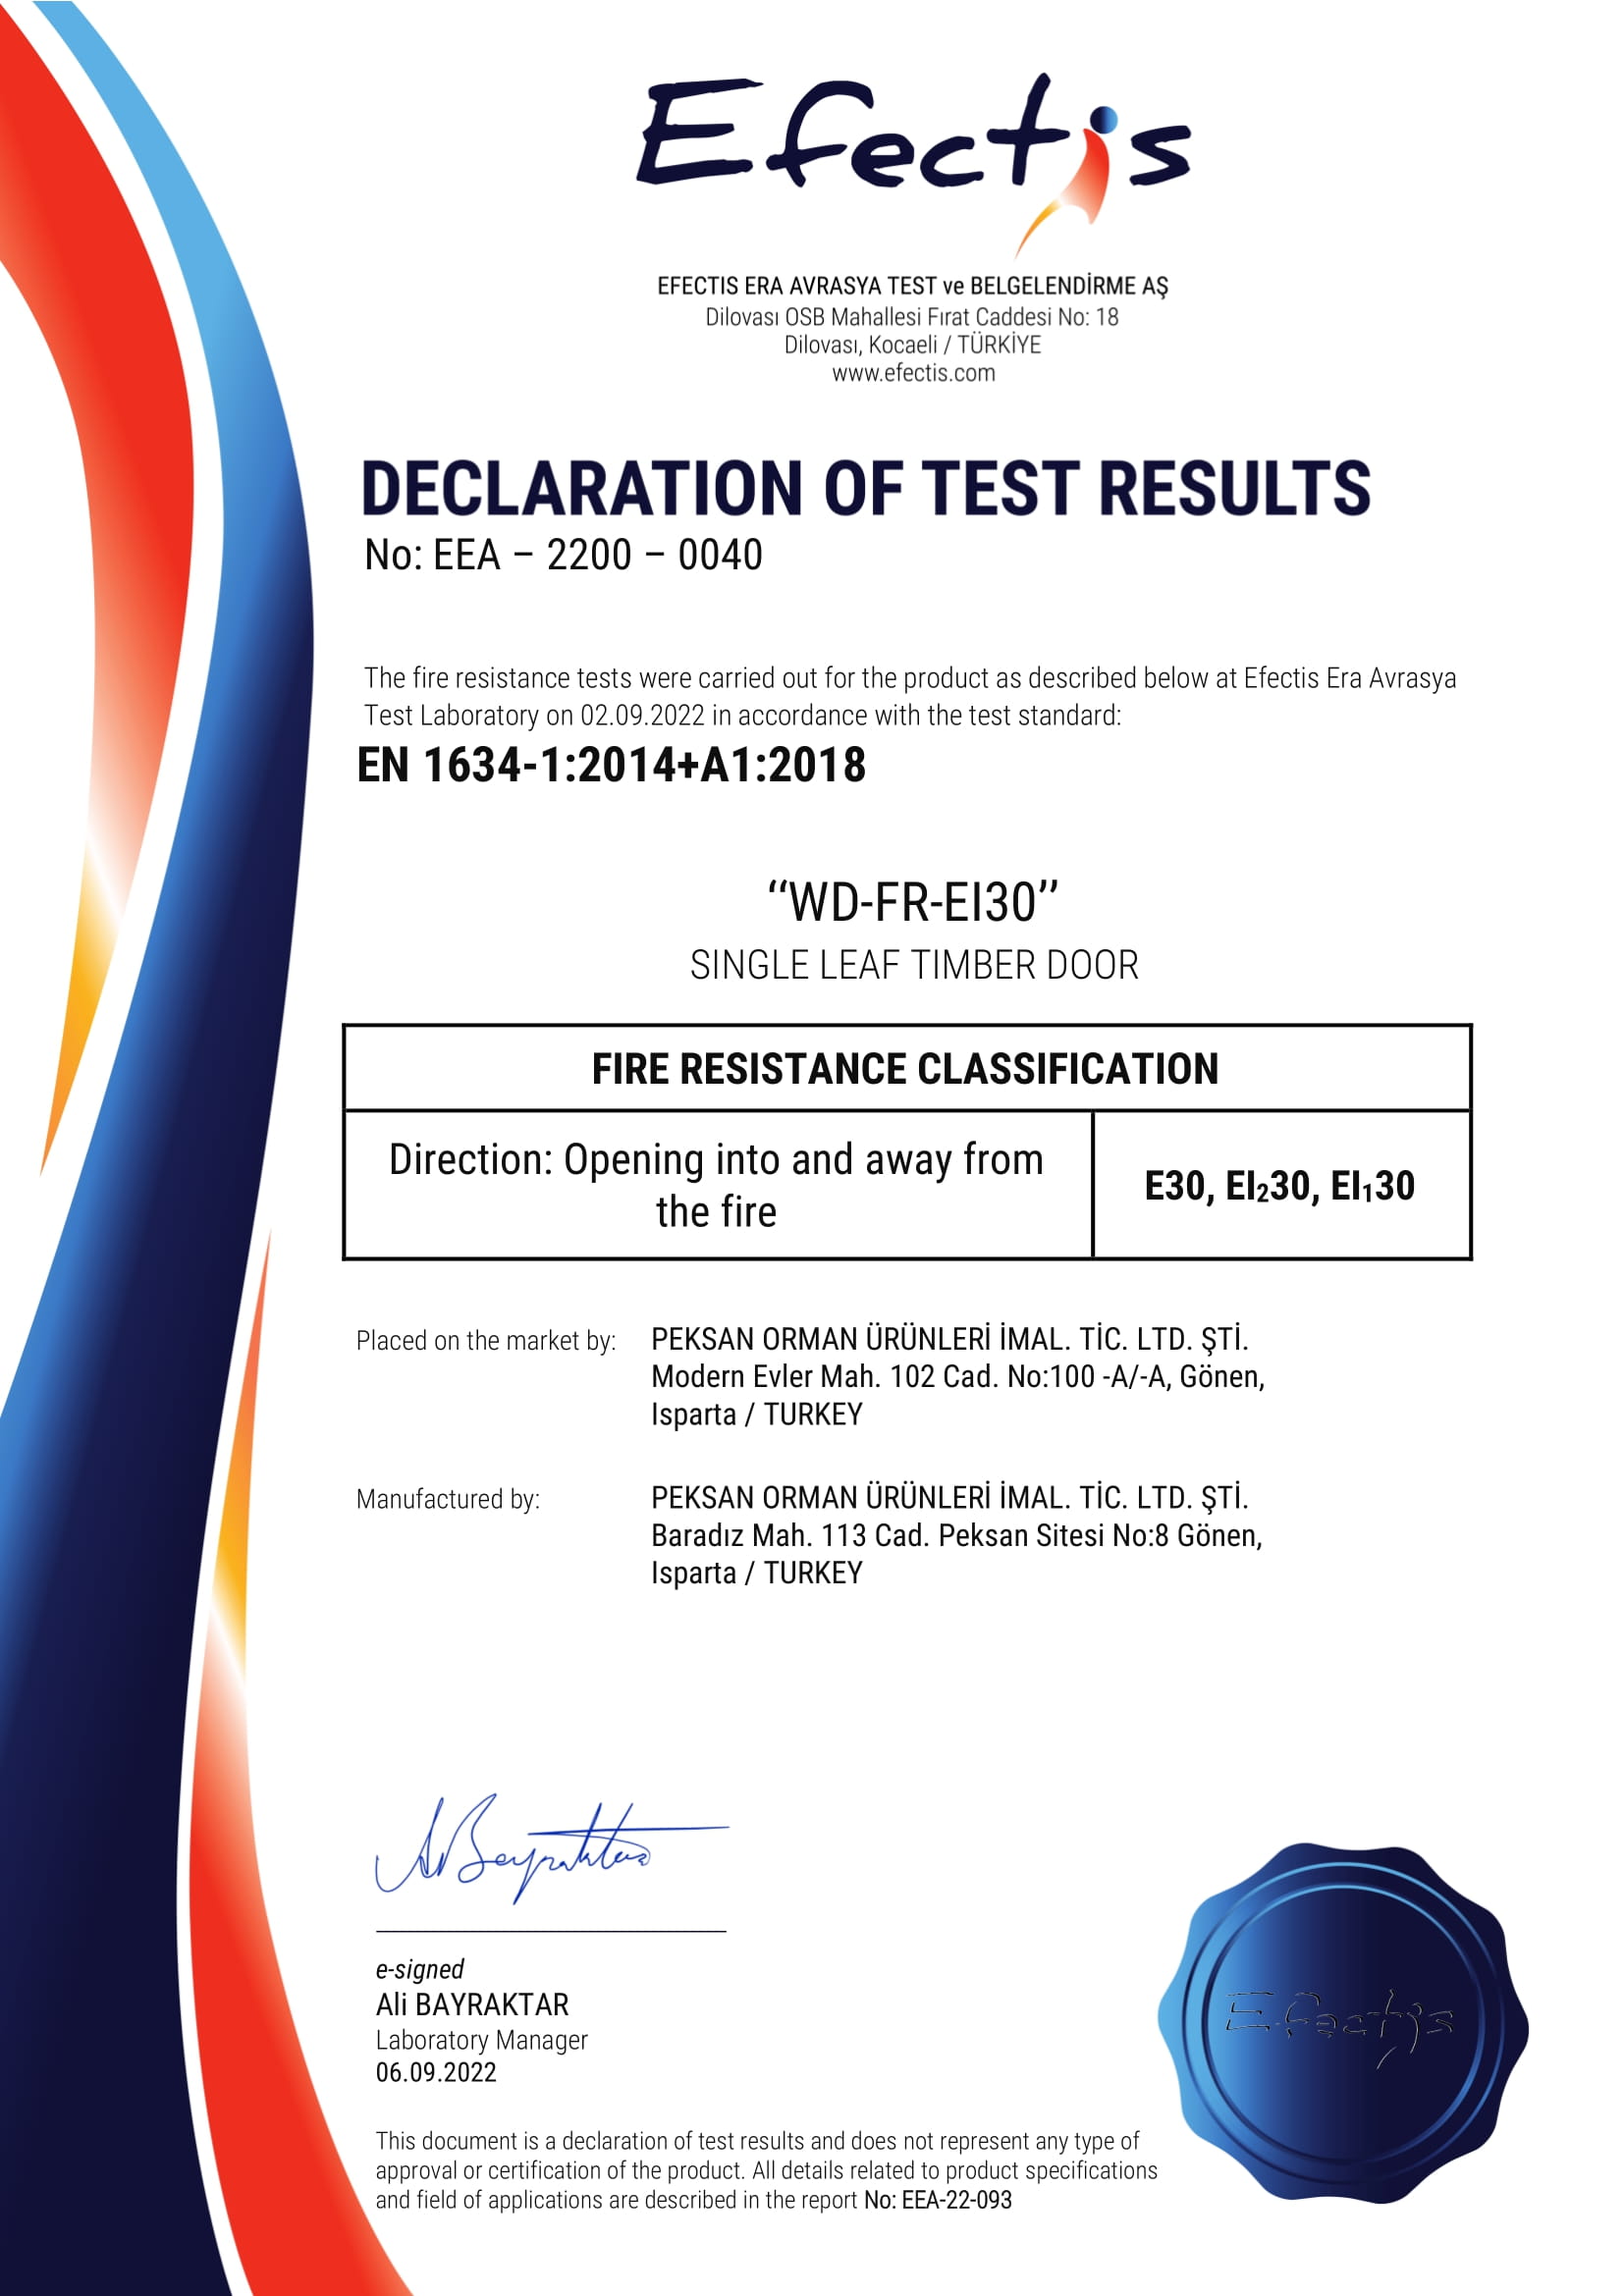 DECLARATION OF TEST RESULTS